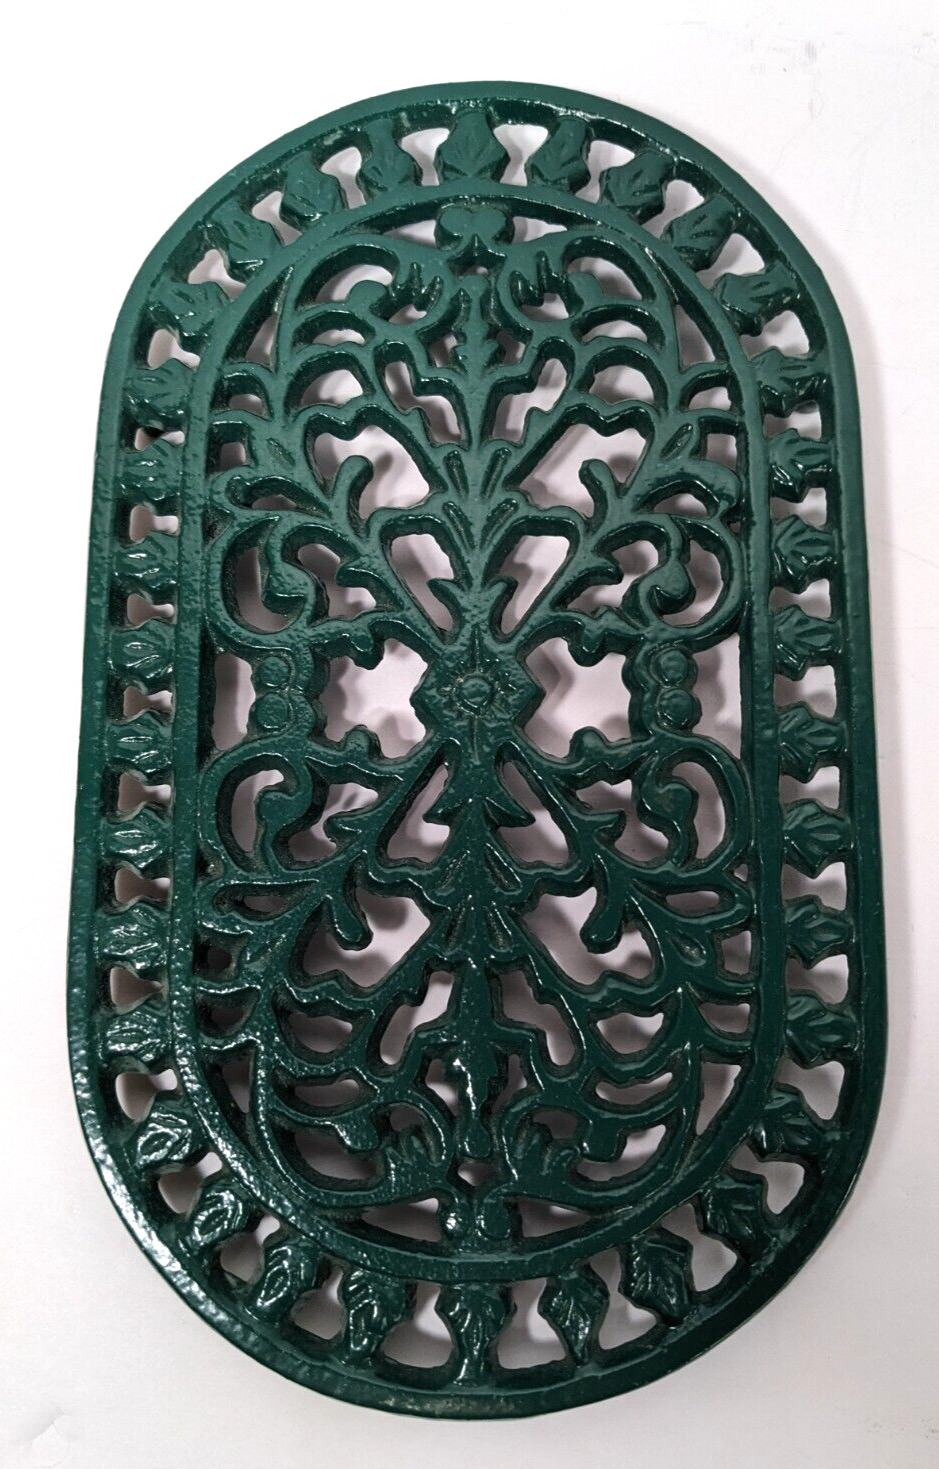 Vintage Cast Iron Enamel Trivet Floral Cutout Oval Footed Hot Plate Stand Green